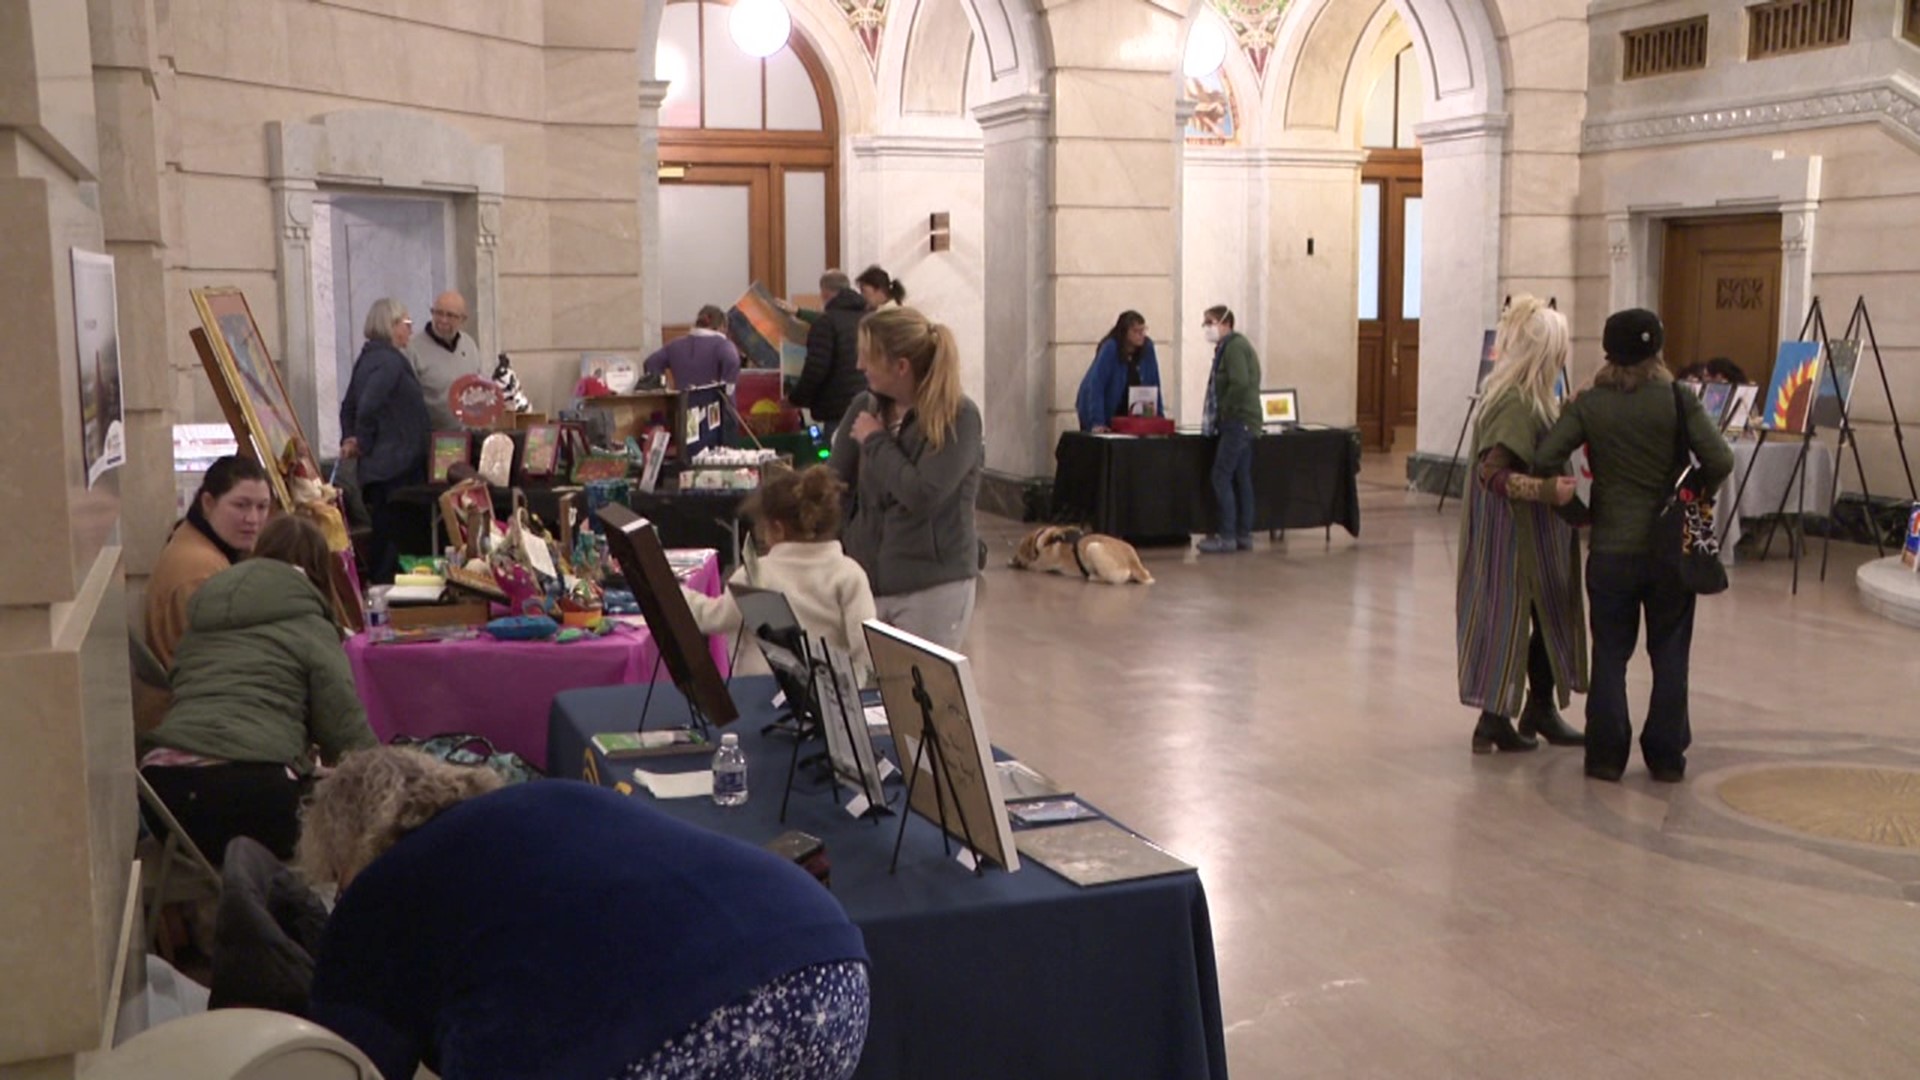 The event celebrated the talents and abilities of individuals with developmental disabilities.